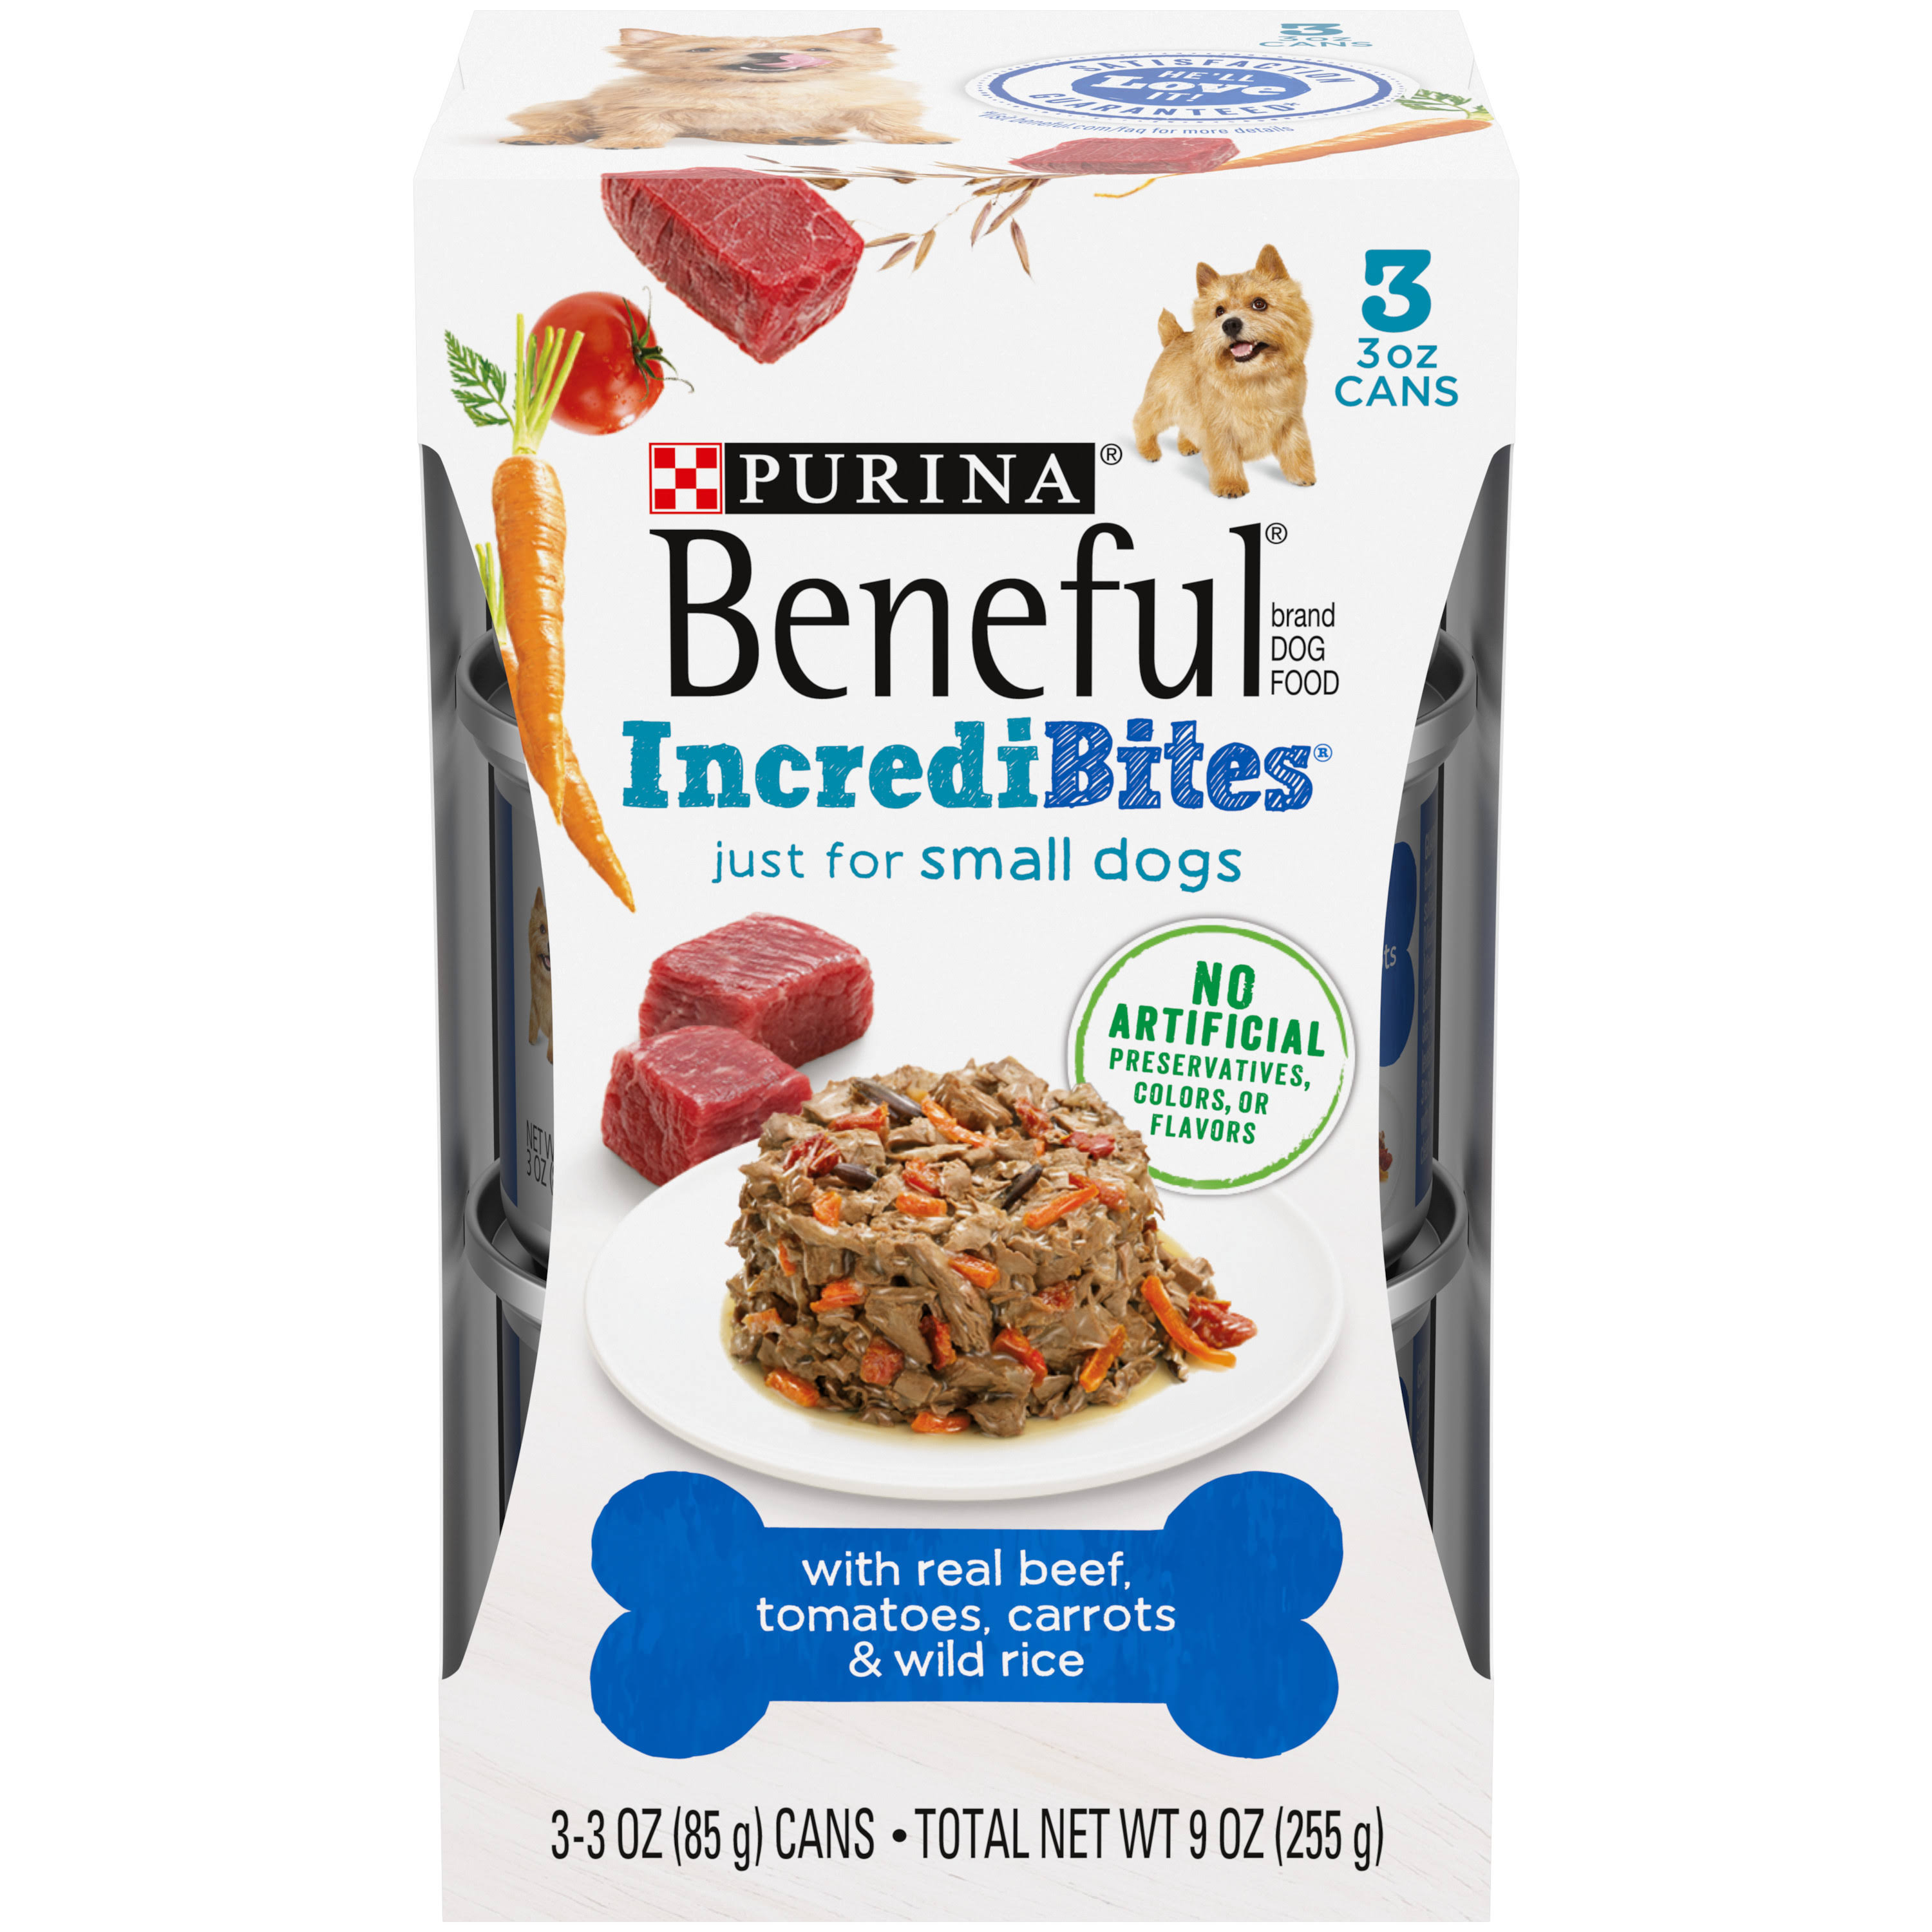 Purina Beneful IncrediBites with Beef Tomatoes Carrots and Wild Rice Wet Dog Food - 3oz, 3ct